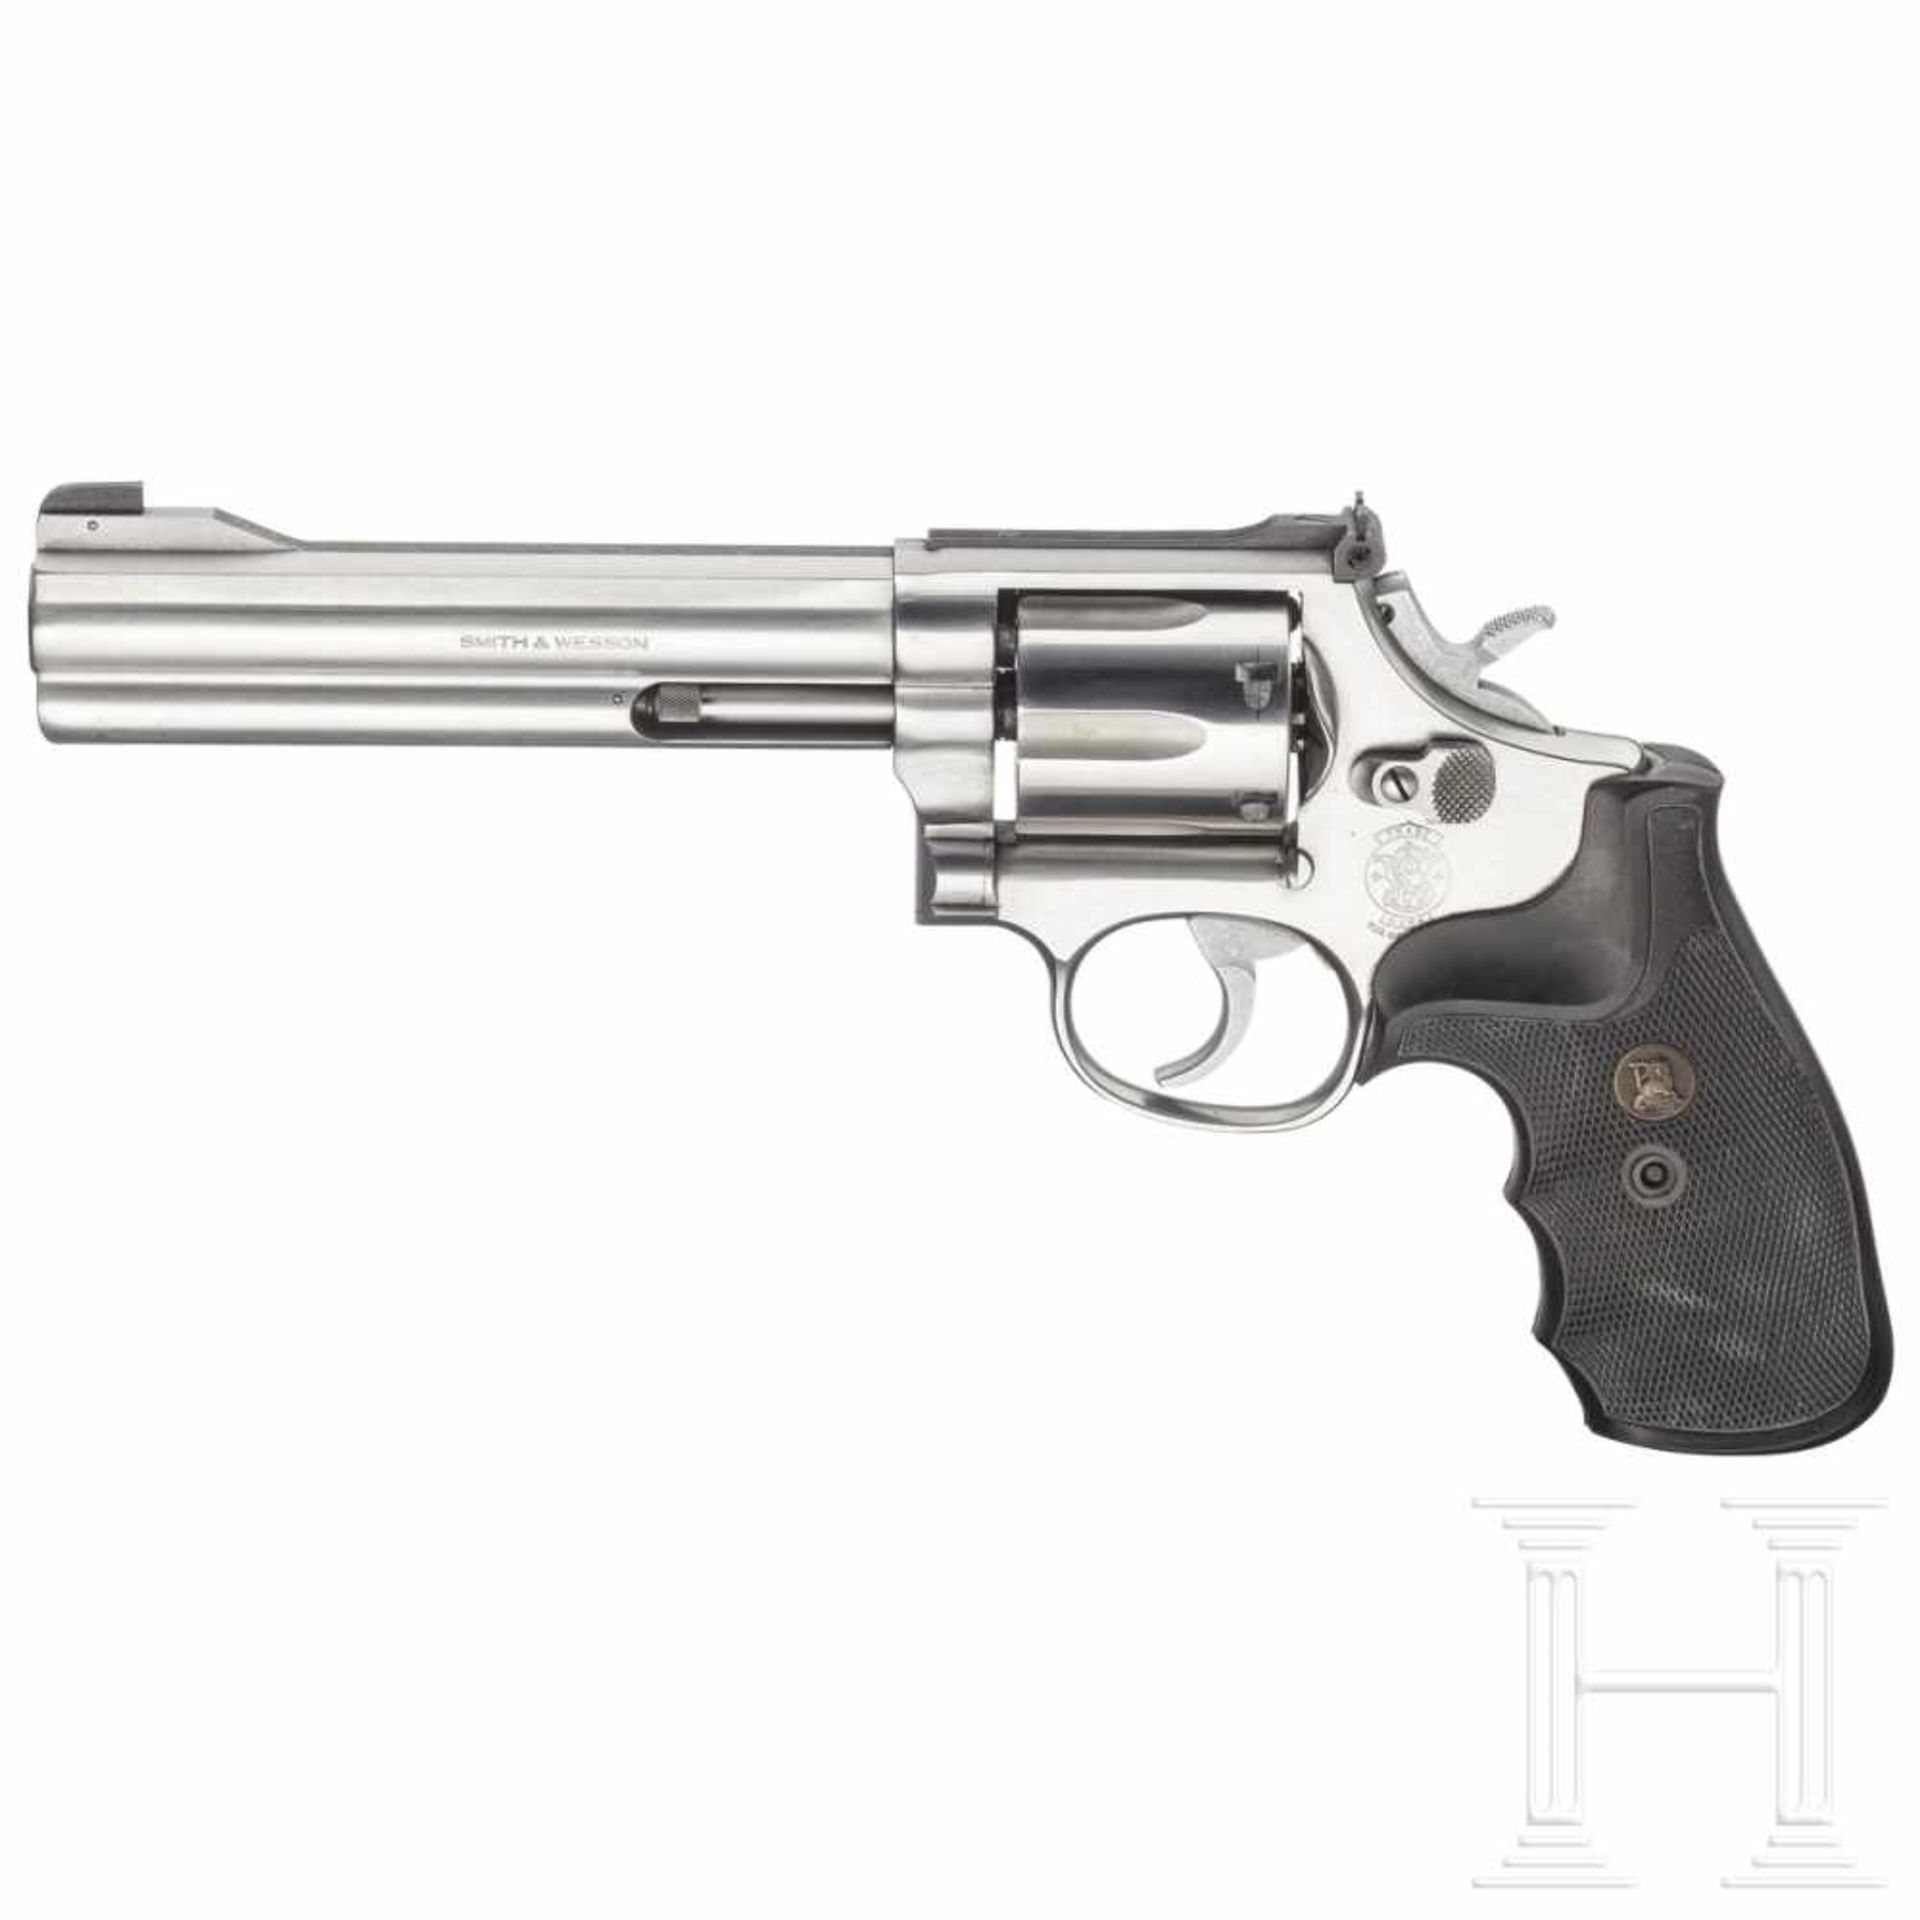 Smith & Wesson Mod. 686, "The .357 Distinguished Combat Magnum StainlessKal. .357 Mag., Nr. AEZ0491,